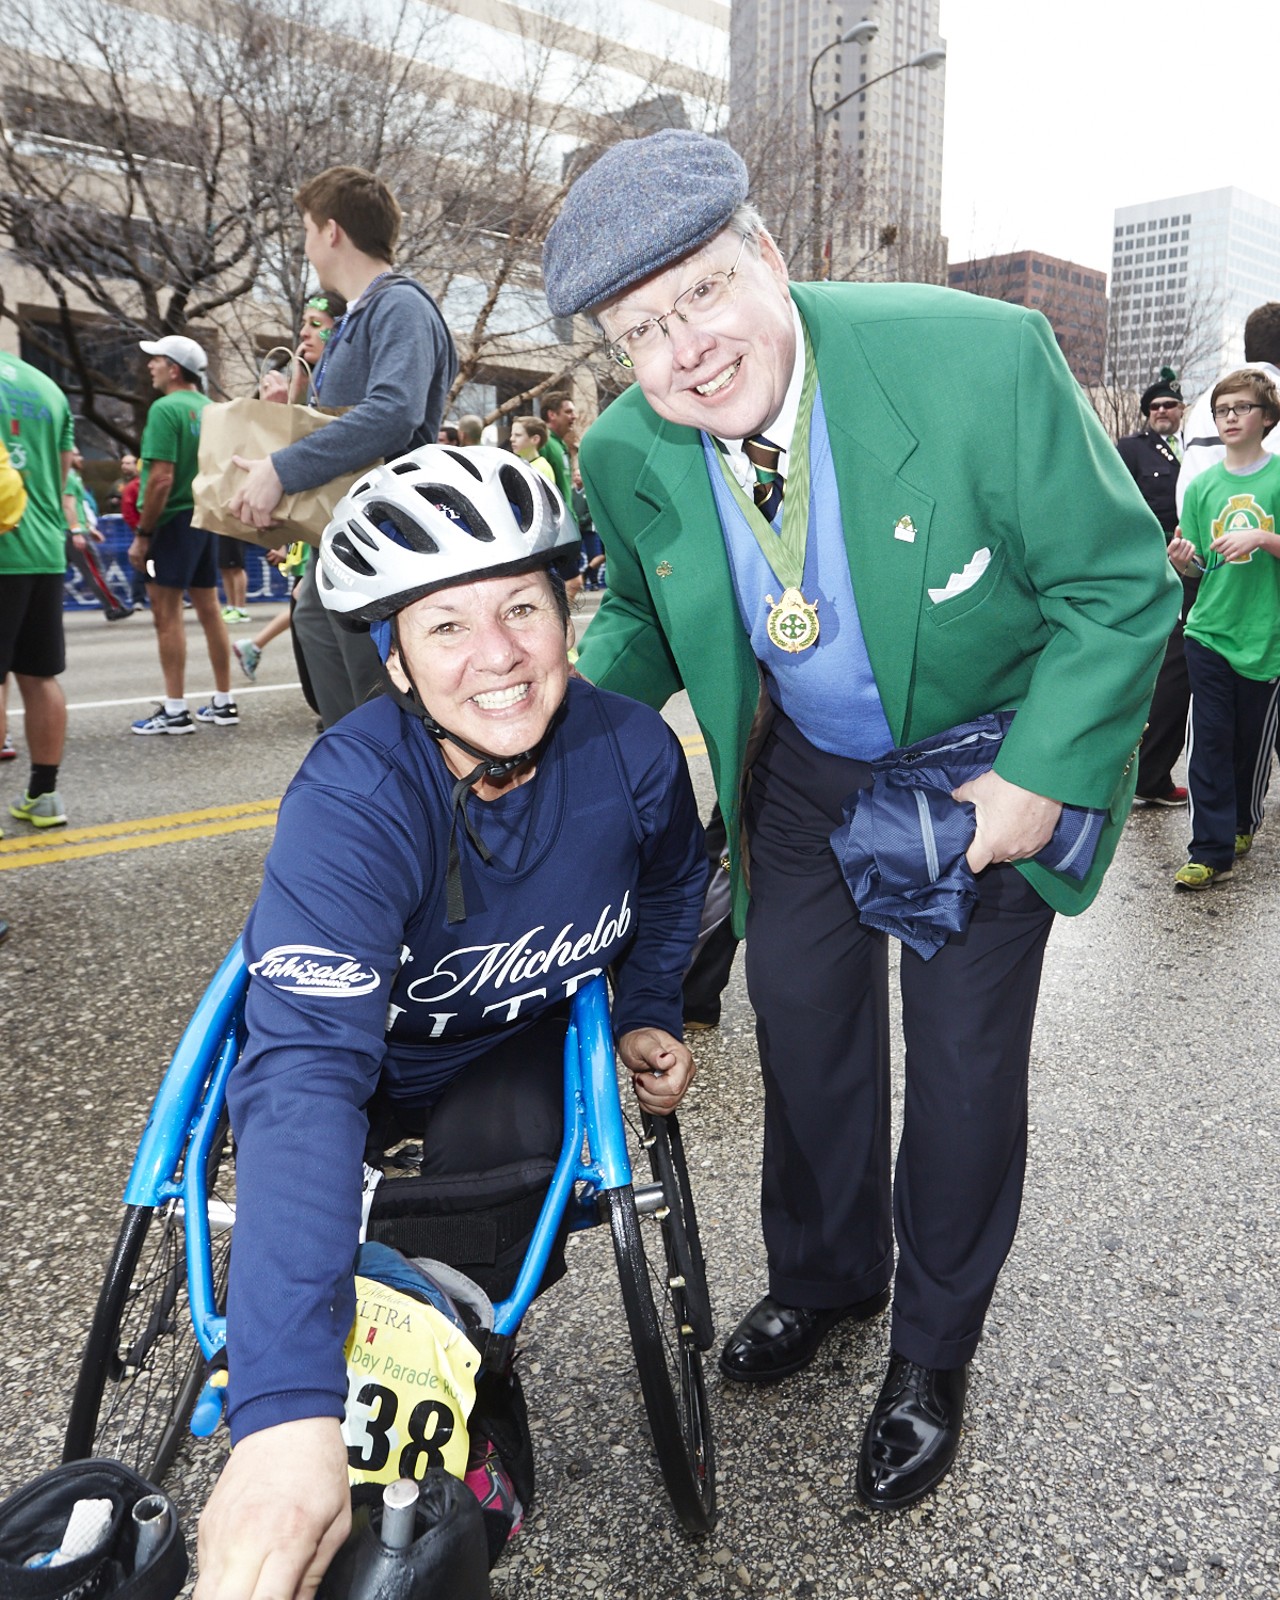 Sandy Daily and Tim Brady pose for a photo post race at the 37th Annual St. Patrick's Day Parade Run in downtown St. Louis on March 14, 2015.